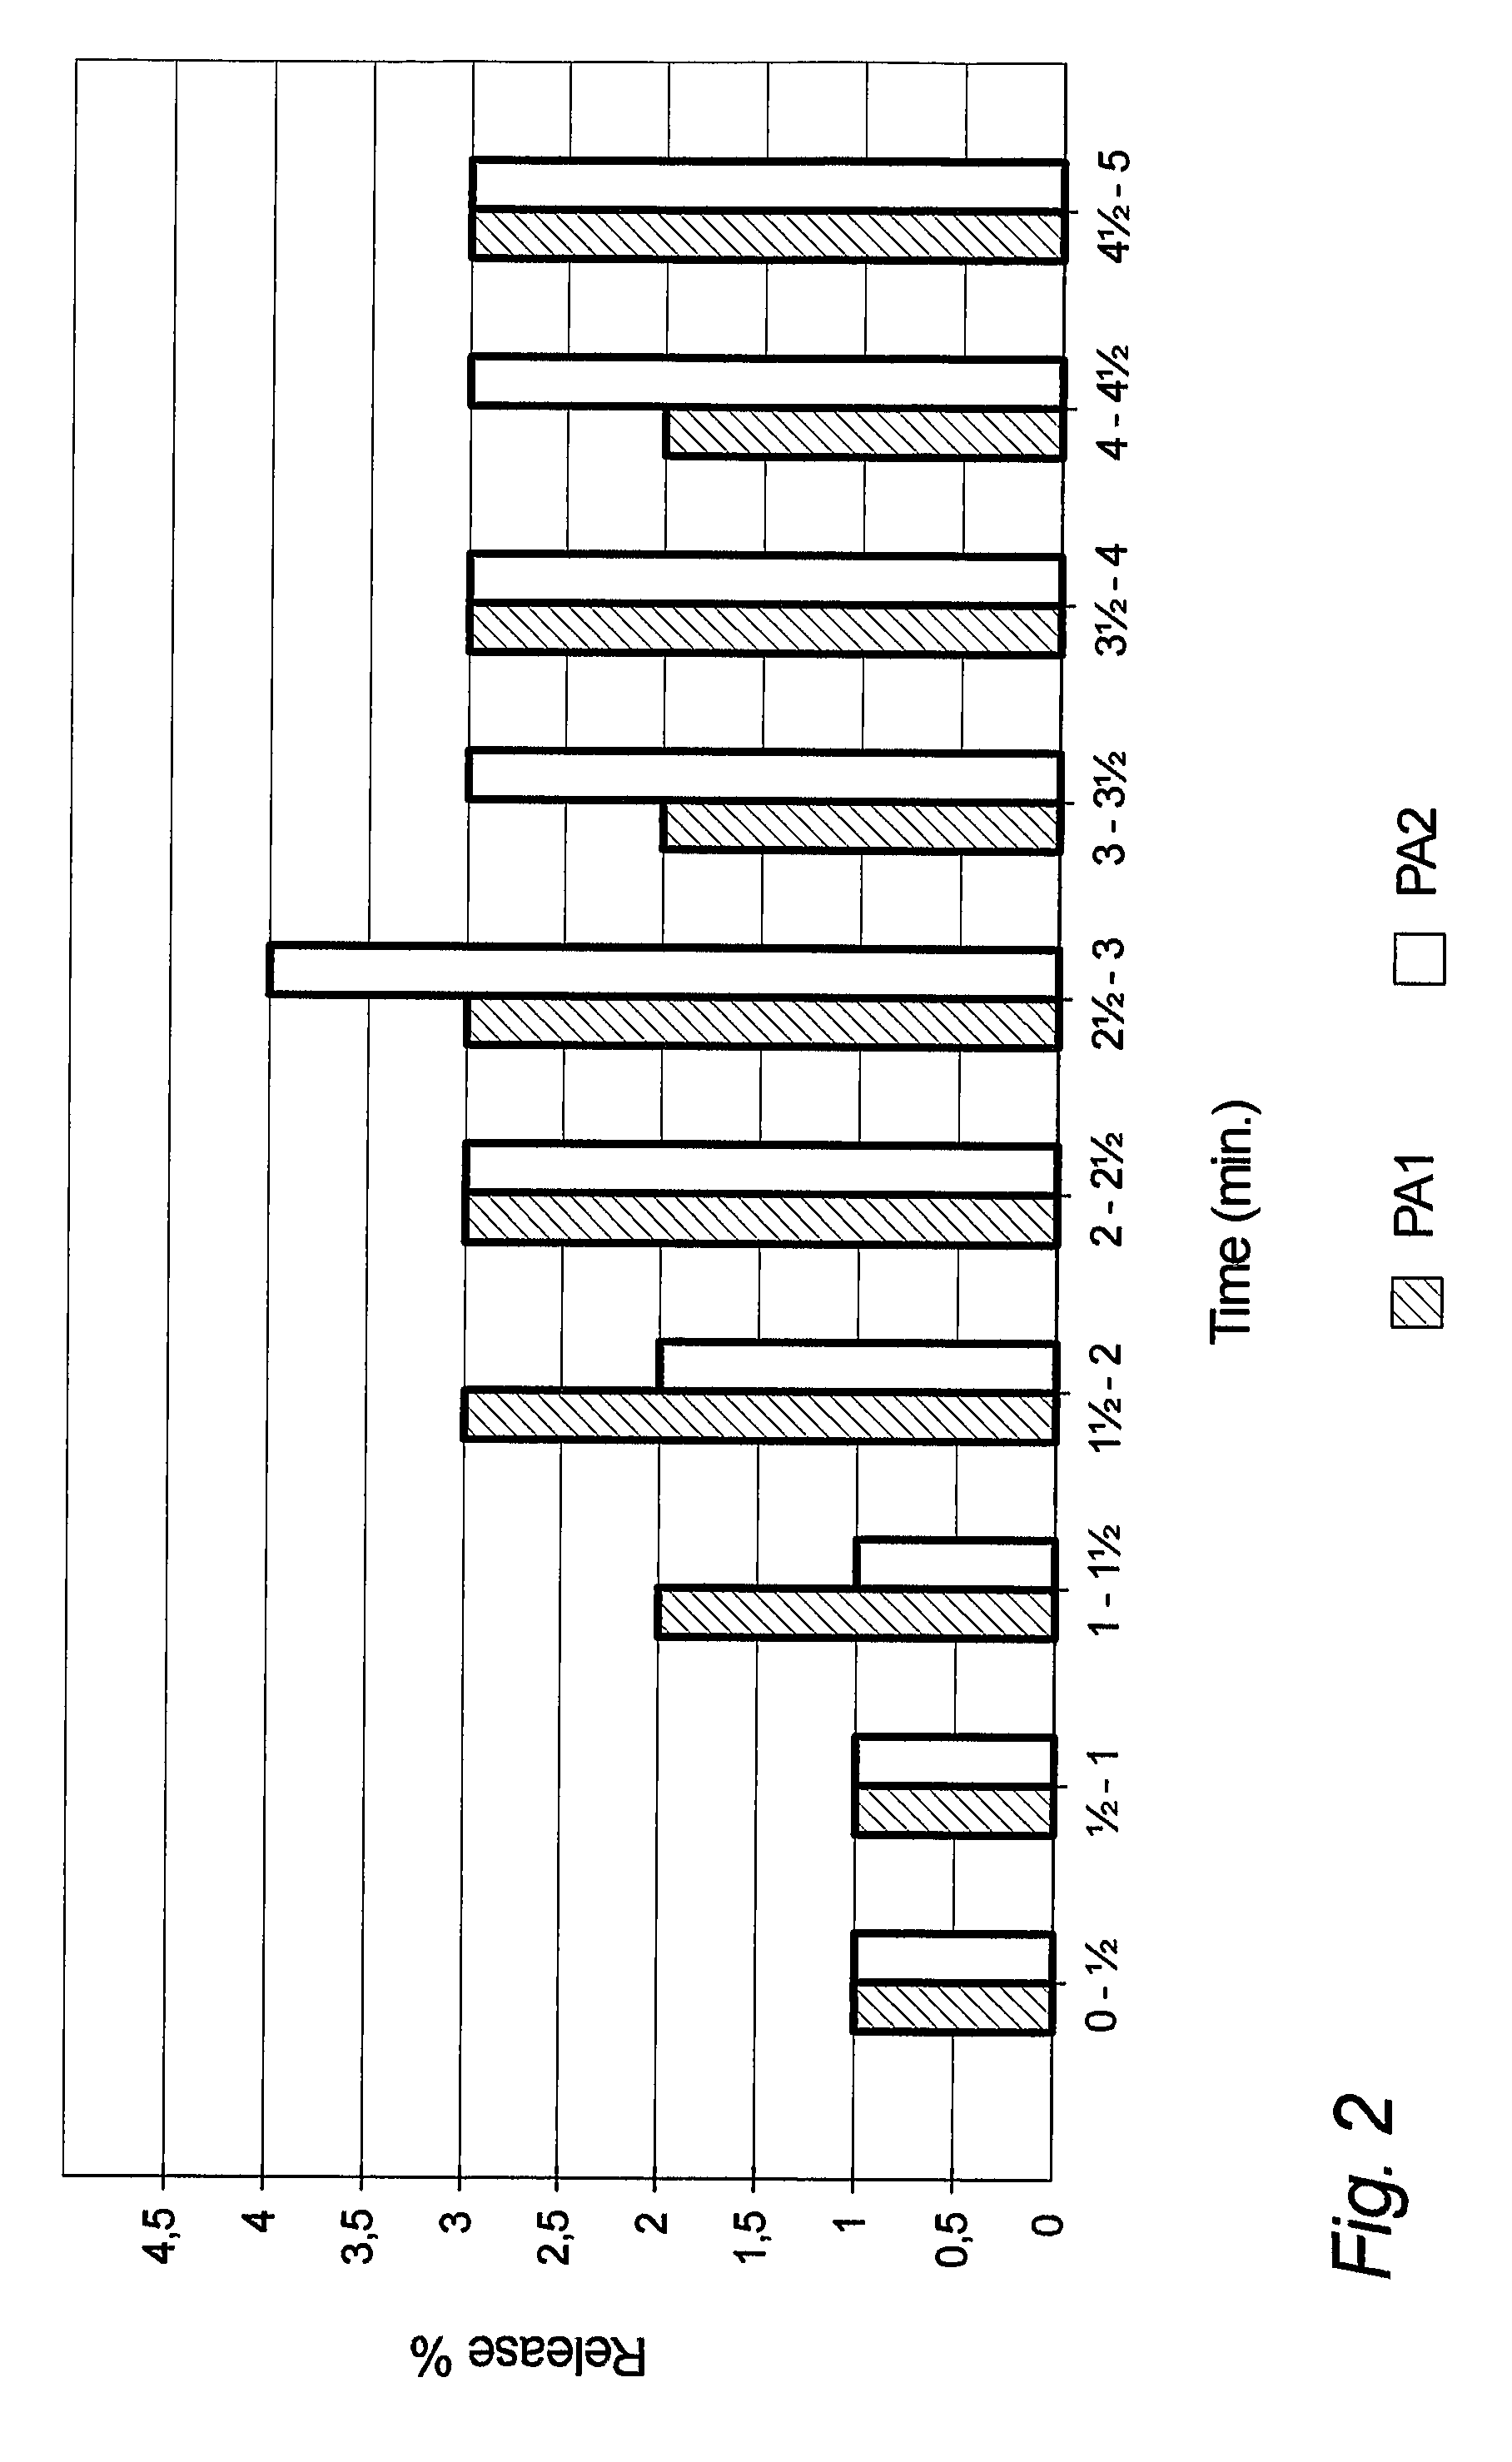 Method of Providing Fast Relief to a User of a Nicotine Chewing Gum